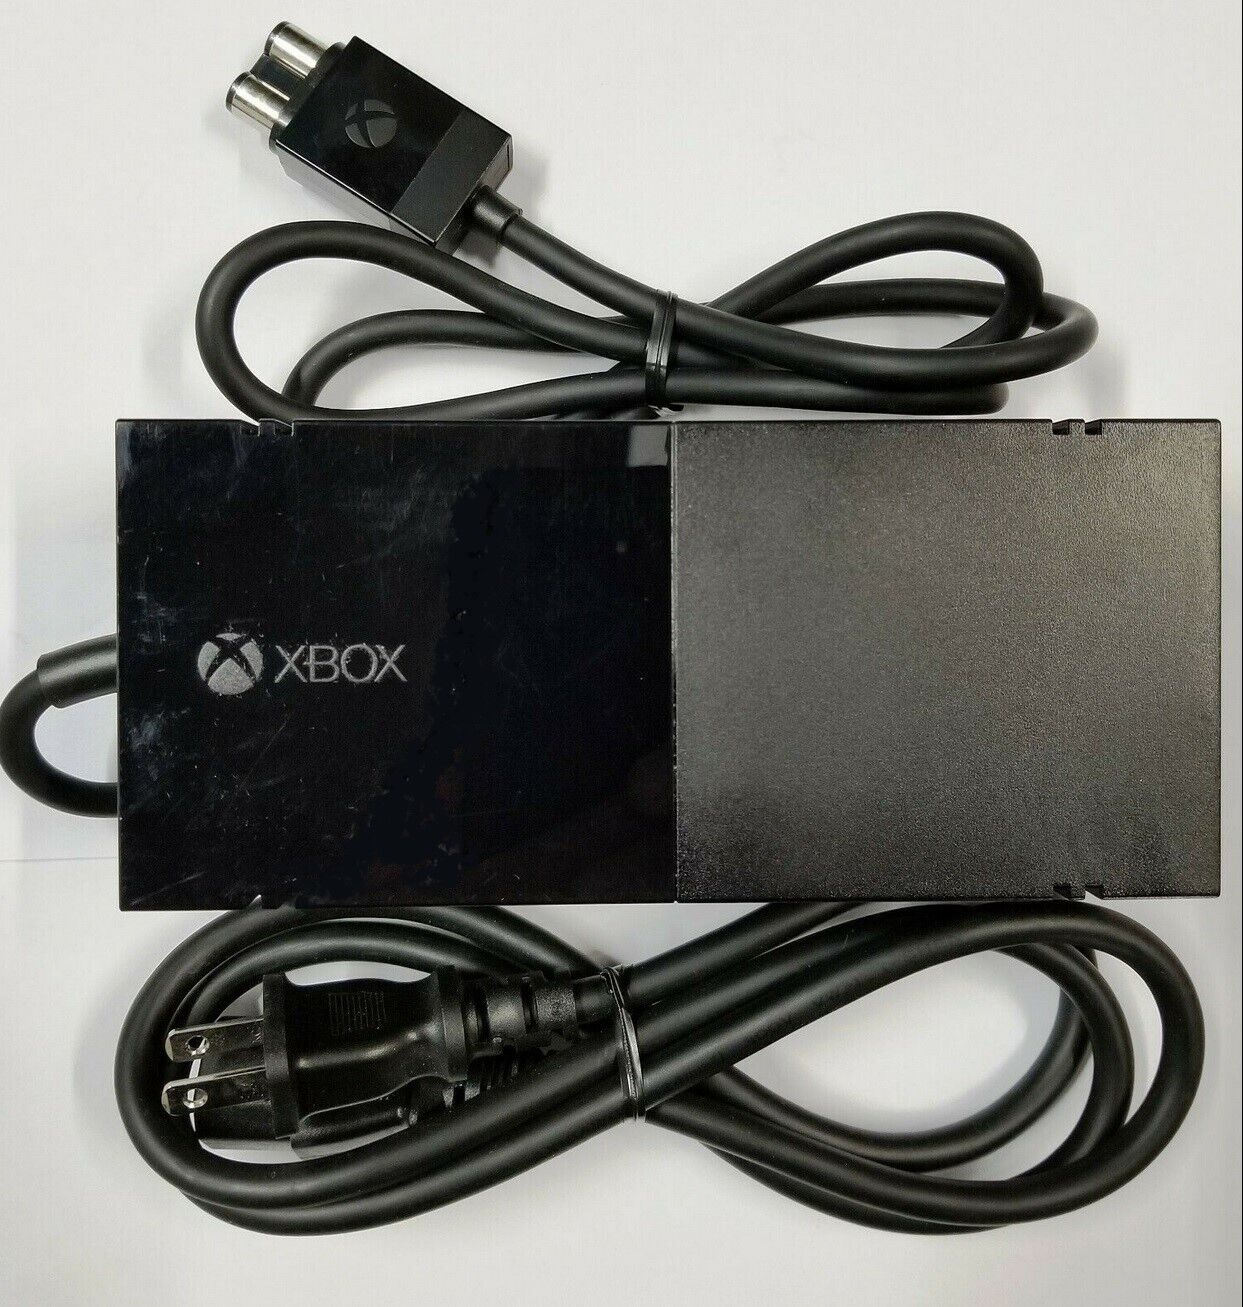 OFFICIAL MICROSOFT Xbox One Fat Power Supply AC Adapter-Not cheap Chinese clone! Model Microsoft Xbox One - Original Co - Click Image to Close